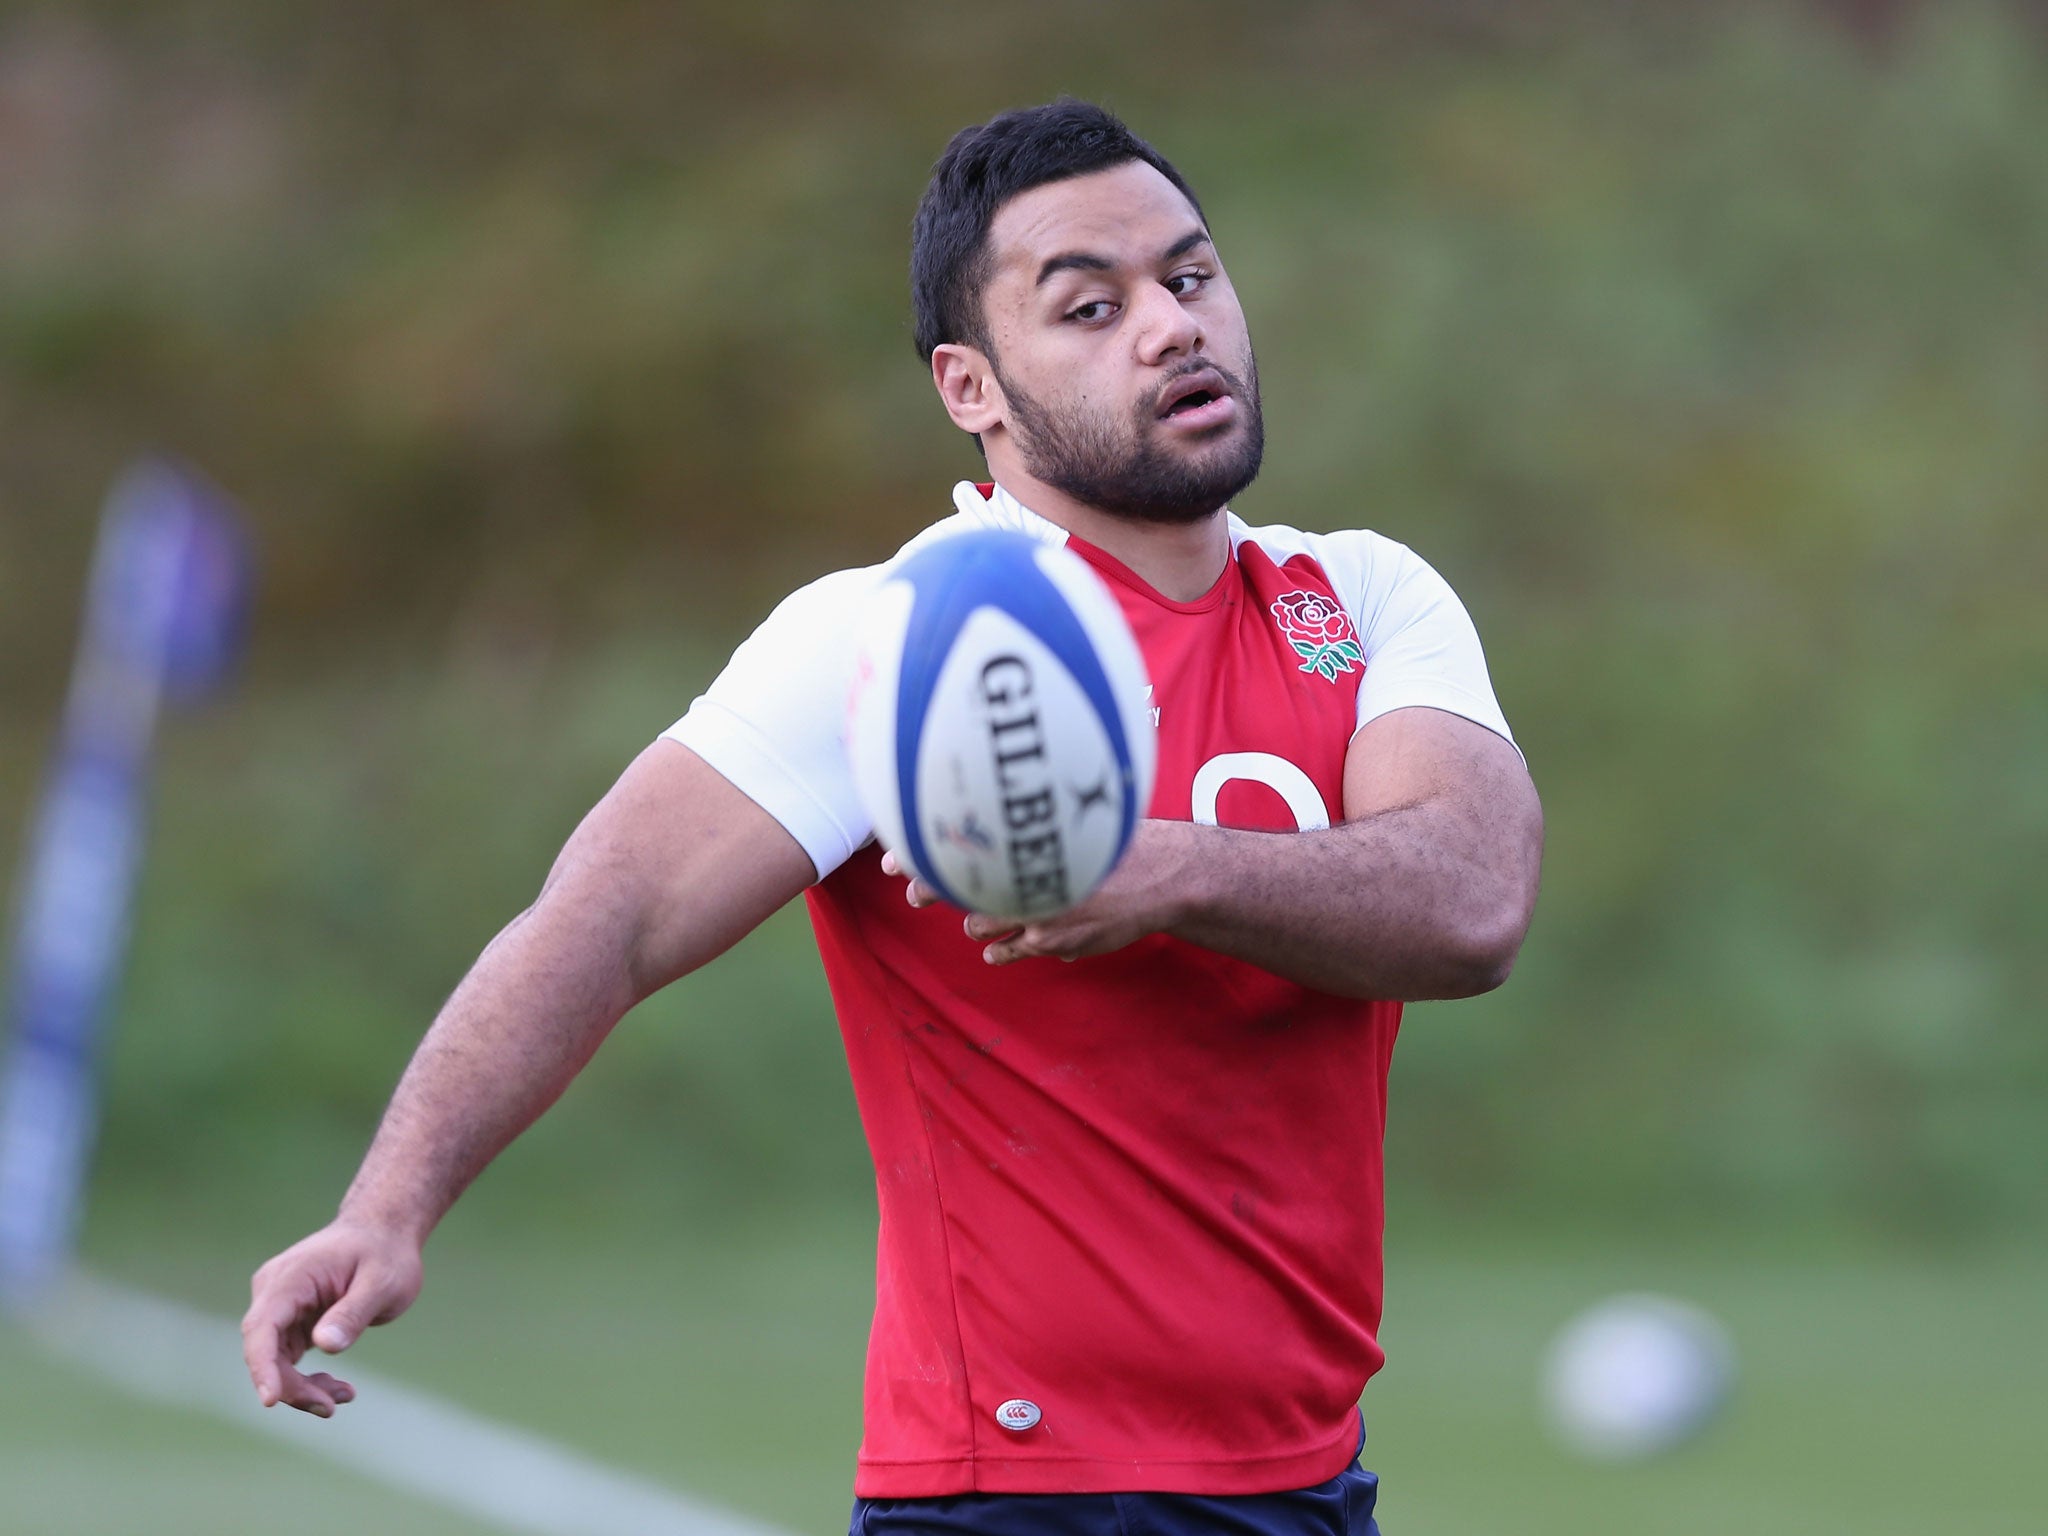 Billy Vunipola can establish himself by next year's World Cup as the world's best No 8